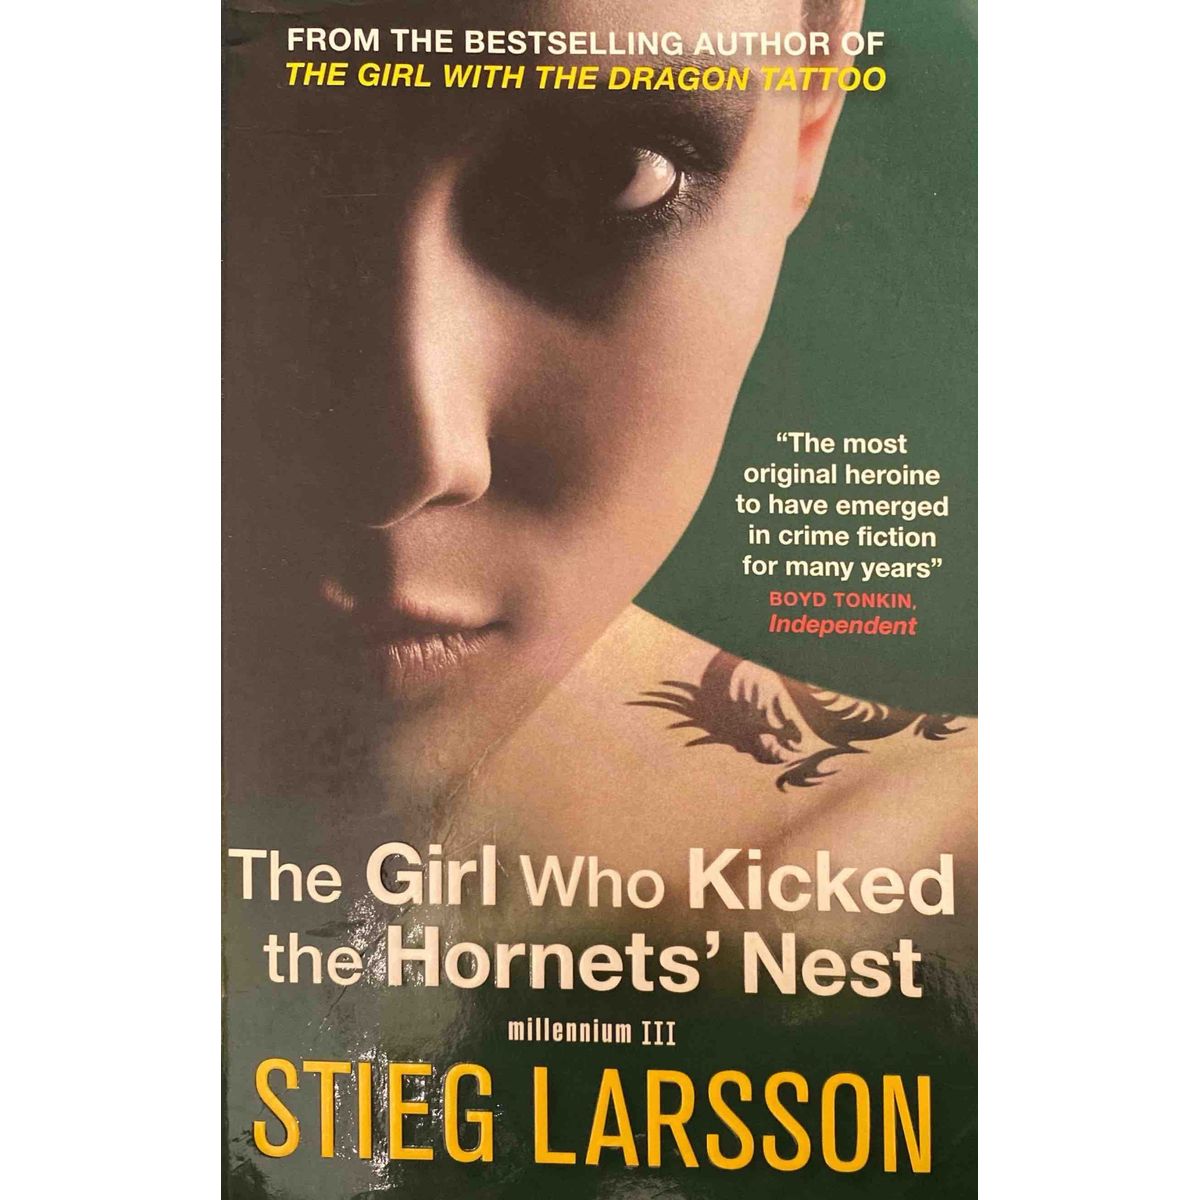 ISBN: 9781849162746 / 1849162743 - The Girl Who Kicked the Hornets' Nest by Stieg Larsson, translated by Reg Keeland [2010]